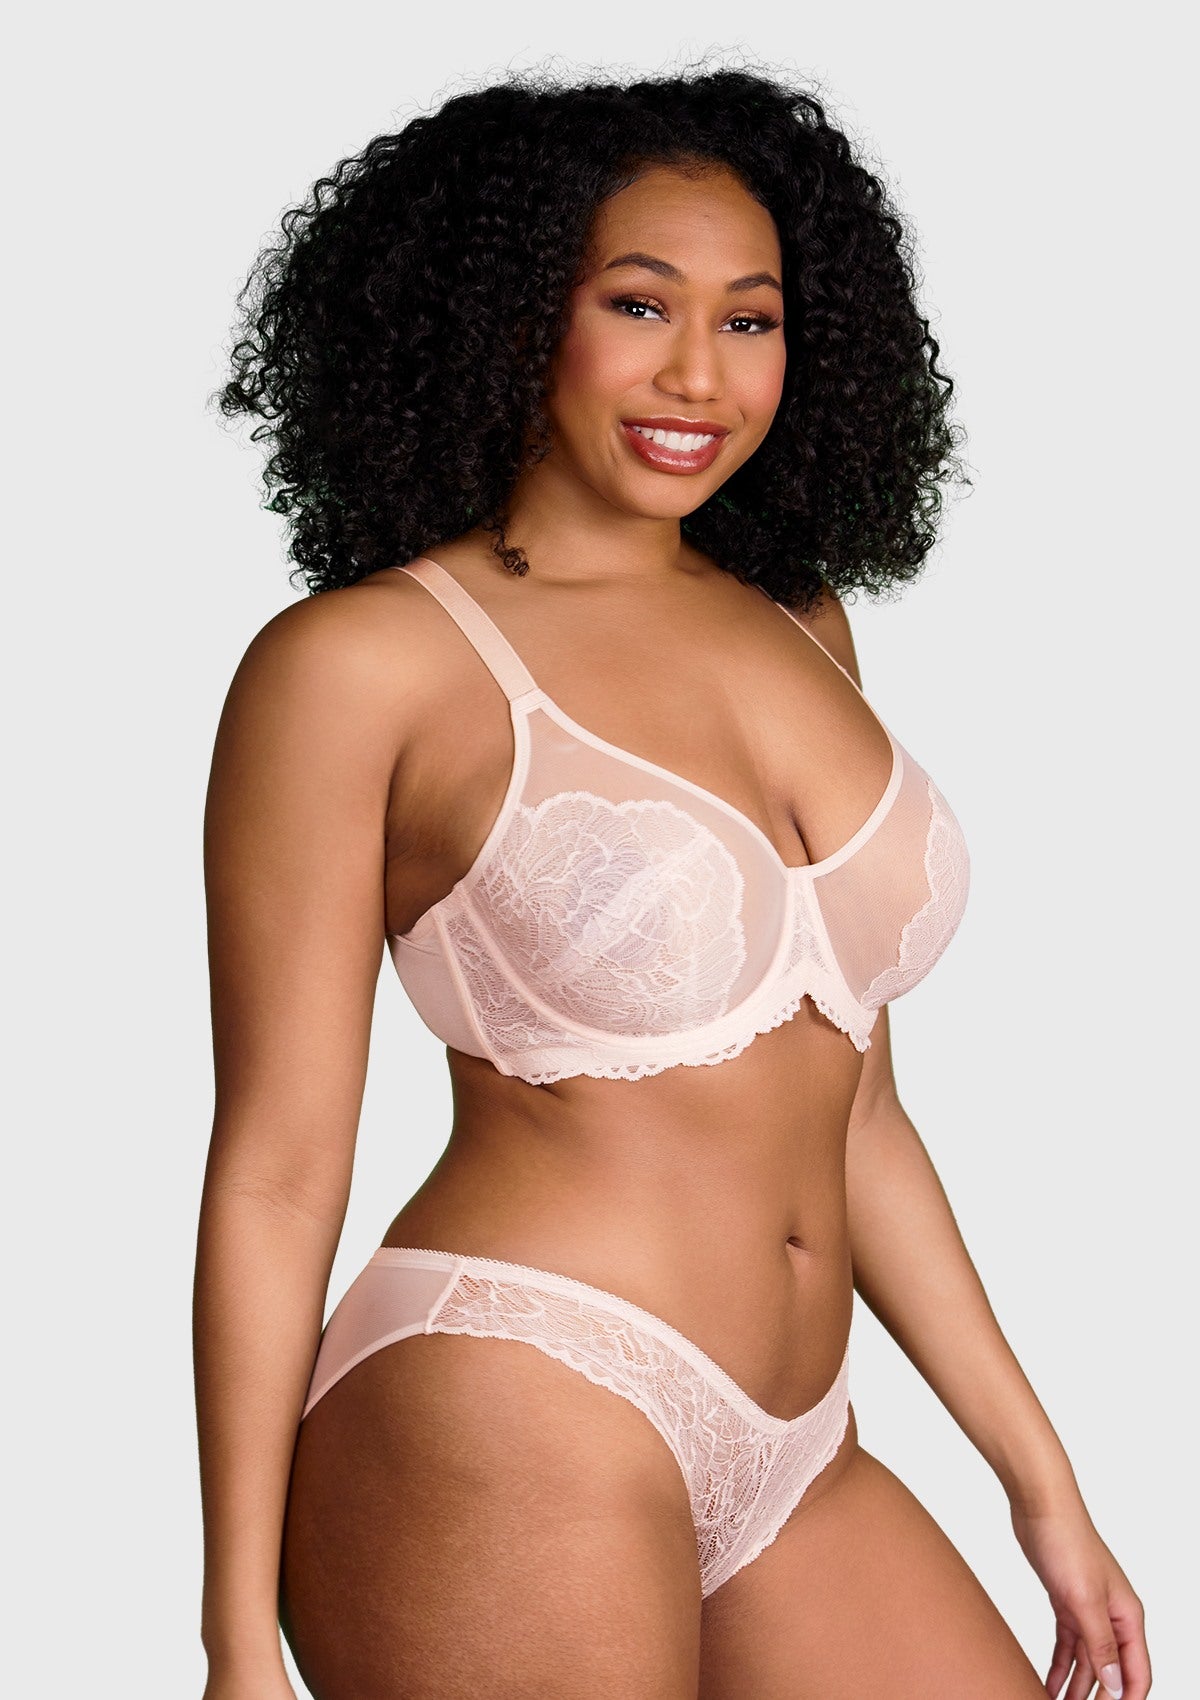 HSIA Blossom Sheer Lace Bra: Comfortable Underwire Bra For Big Busts - Dusty Peach / 42 / G